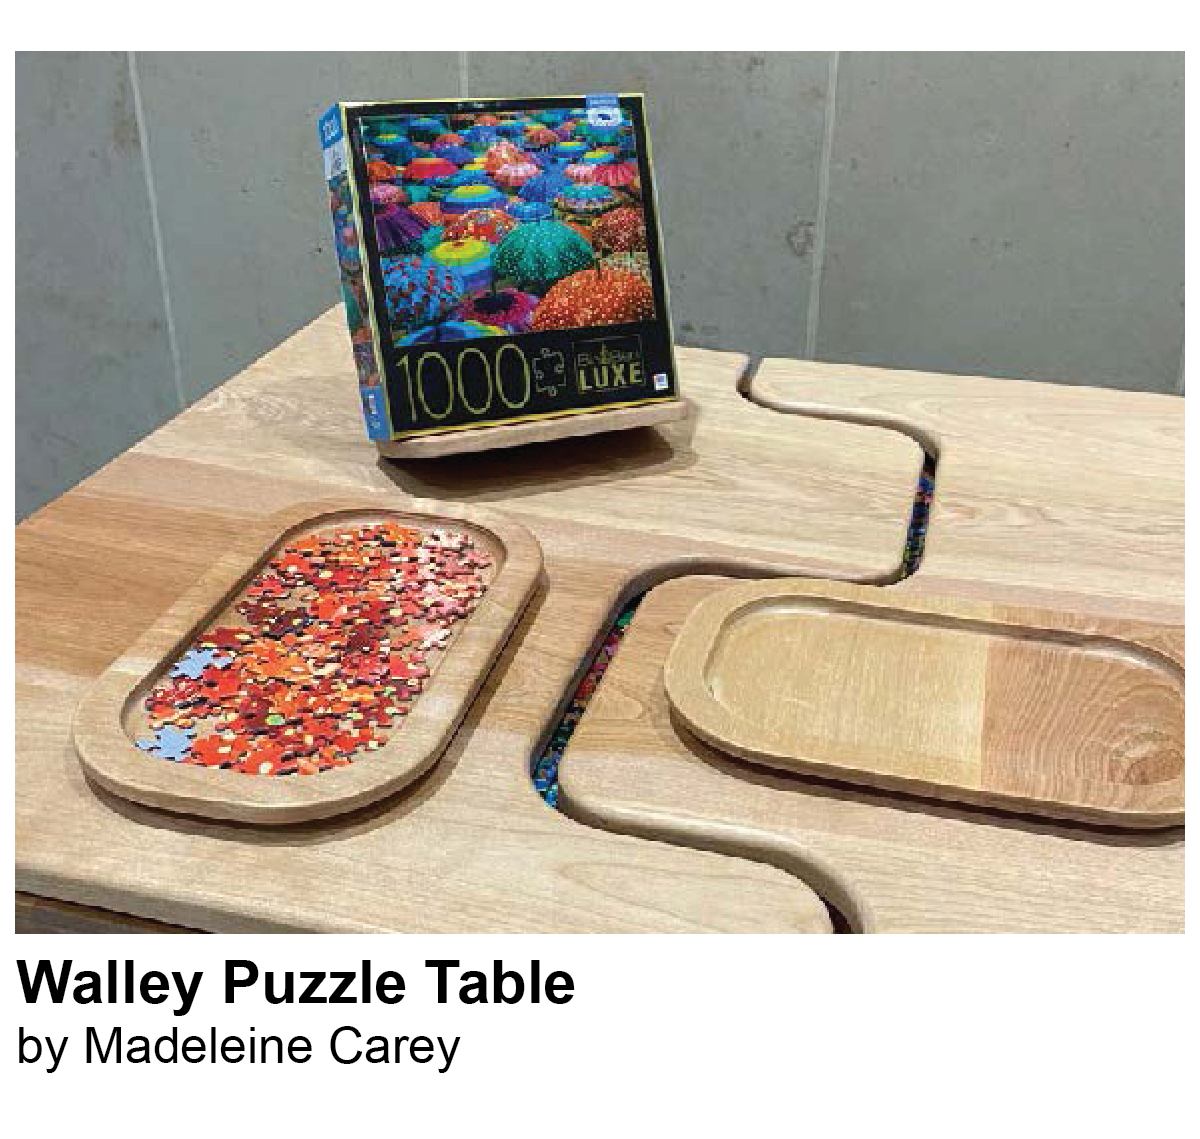 Walley Puzzle Table by Madeleine Carey